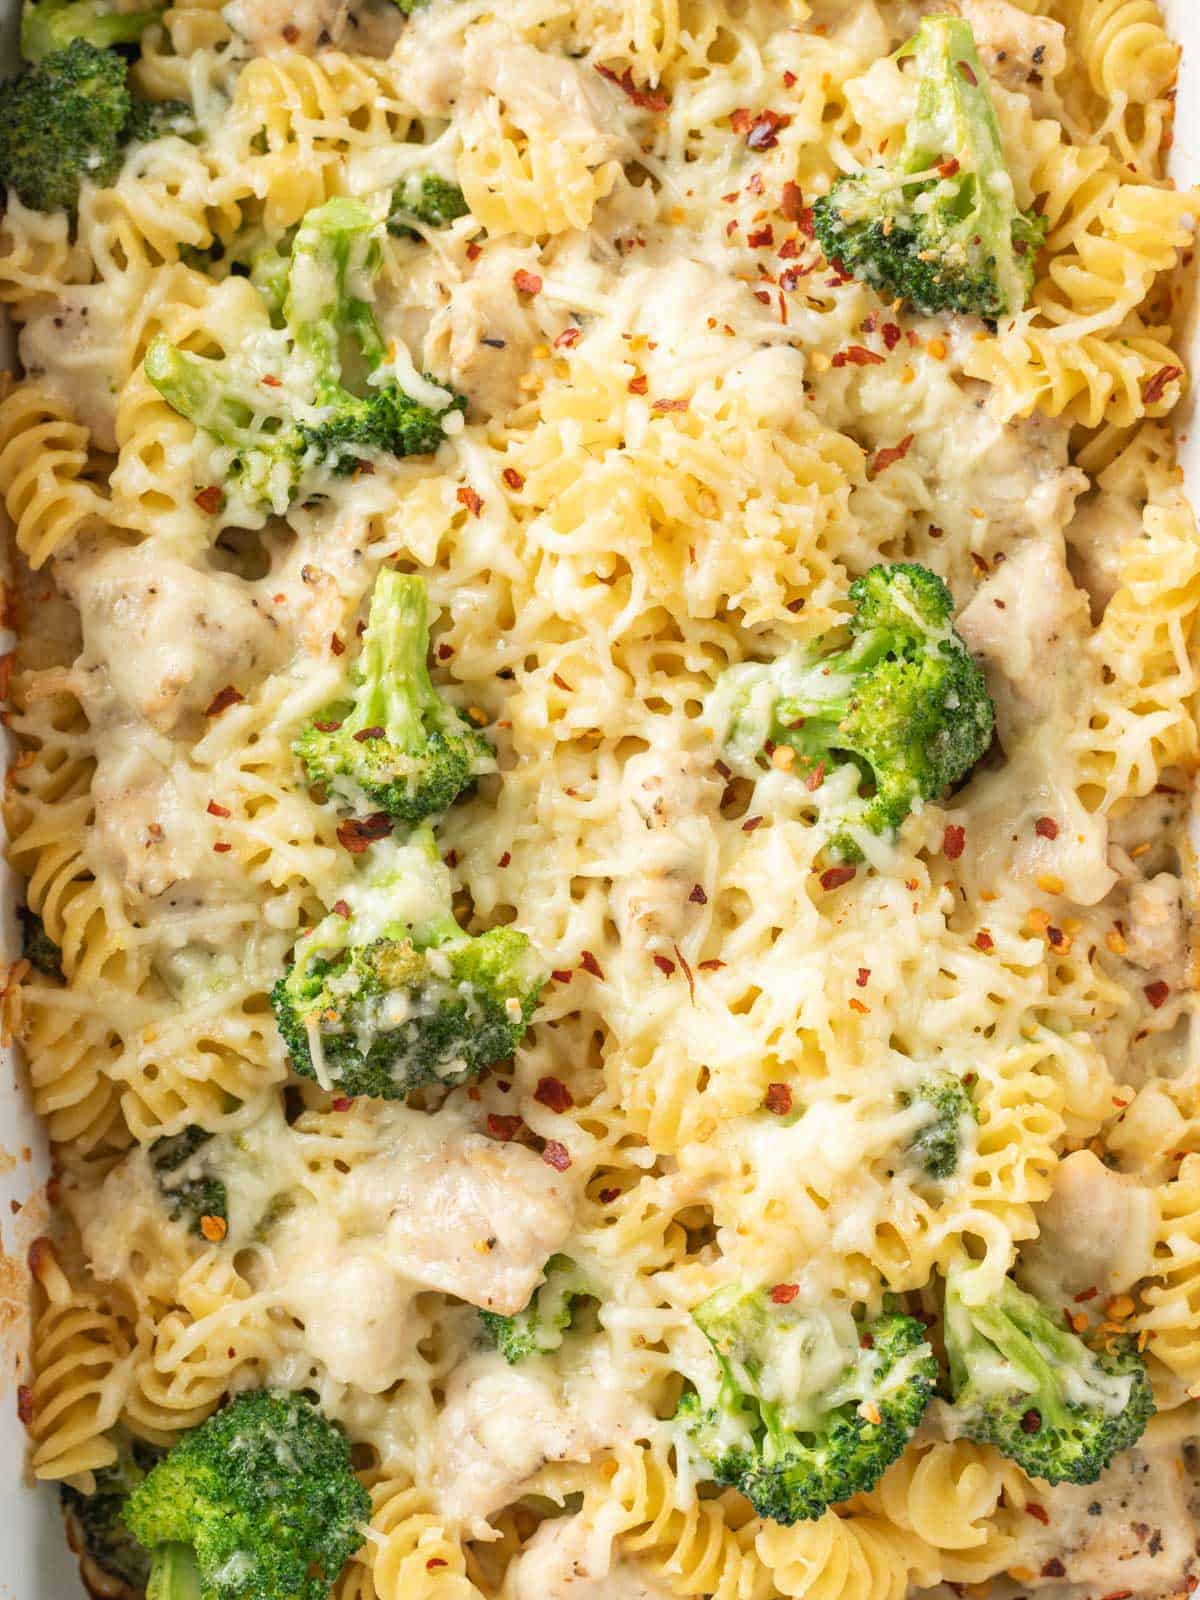 close up shot showing the chicken and broccoli pasta bake